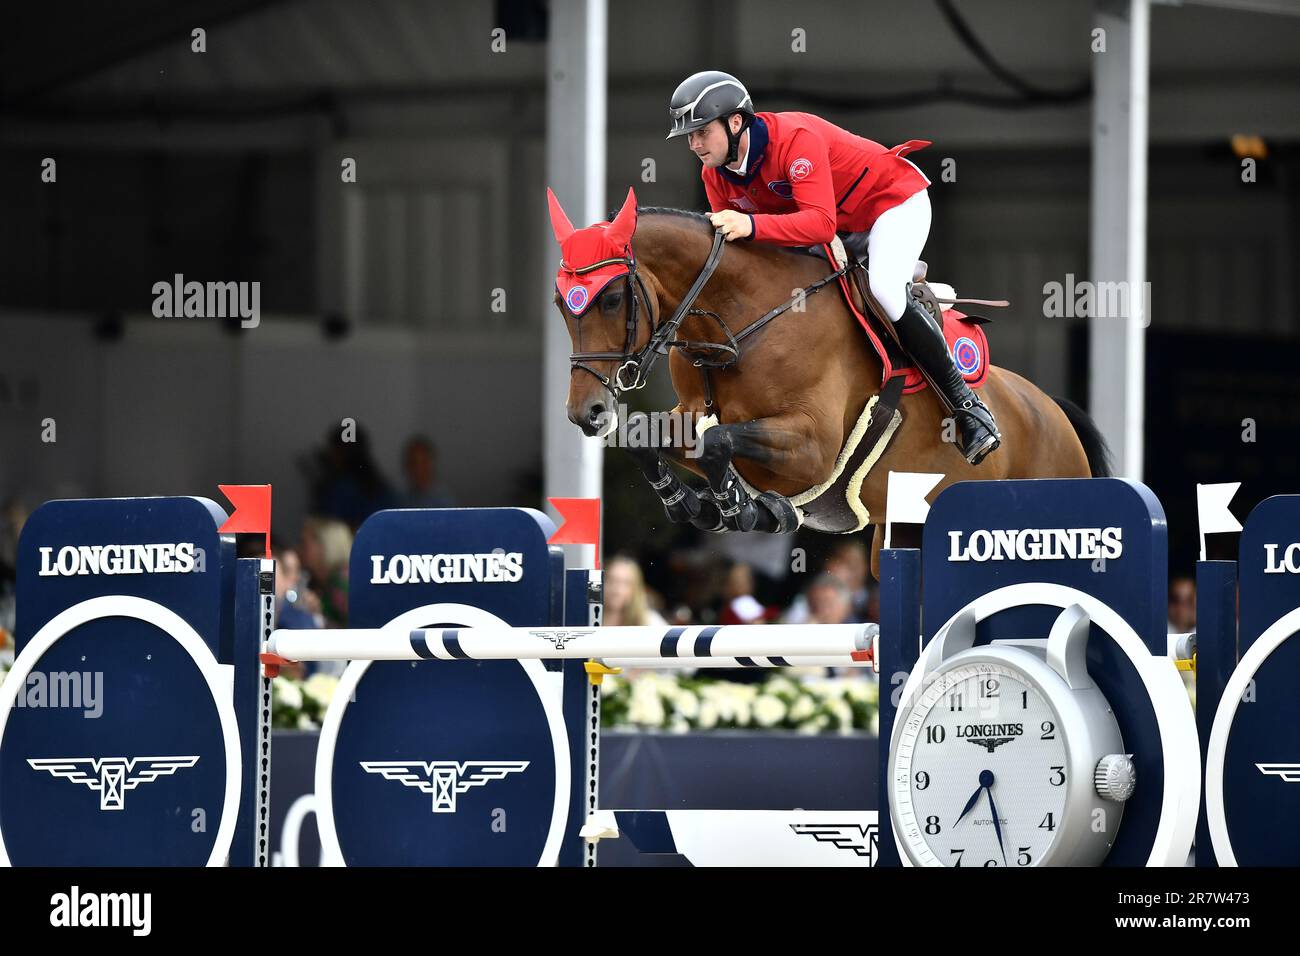 Stockholm, Sweden. 17th June, 2023. STOCKHOLM 20230617 Jeremy Sweetnam, Ireland, with the horse Aglaia J during the team show jumping competition at the Longines Global Champions Tour in Stockholm on Saturday. Photo: Caisa Rasmussen/TT/code 12150 Credit: TT News Agency/Alamy Live News Stock Photo